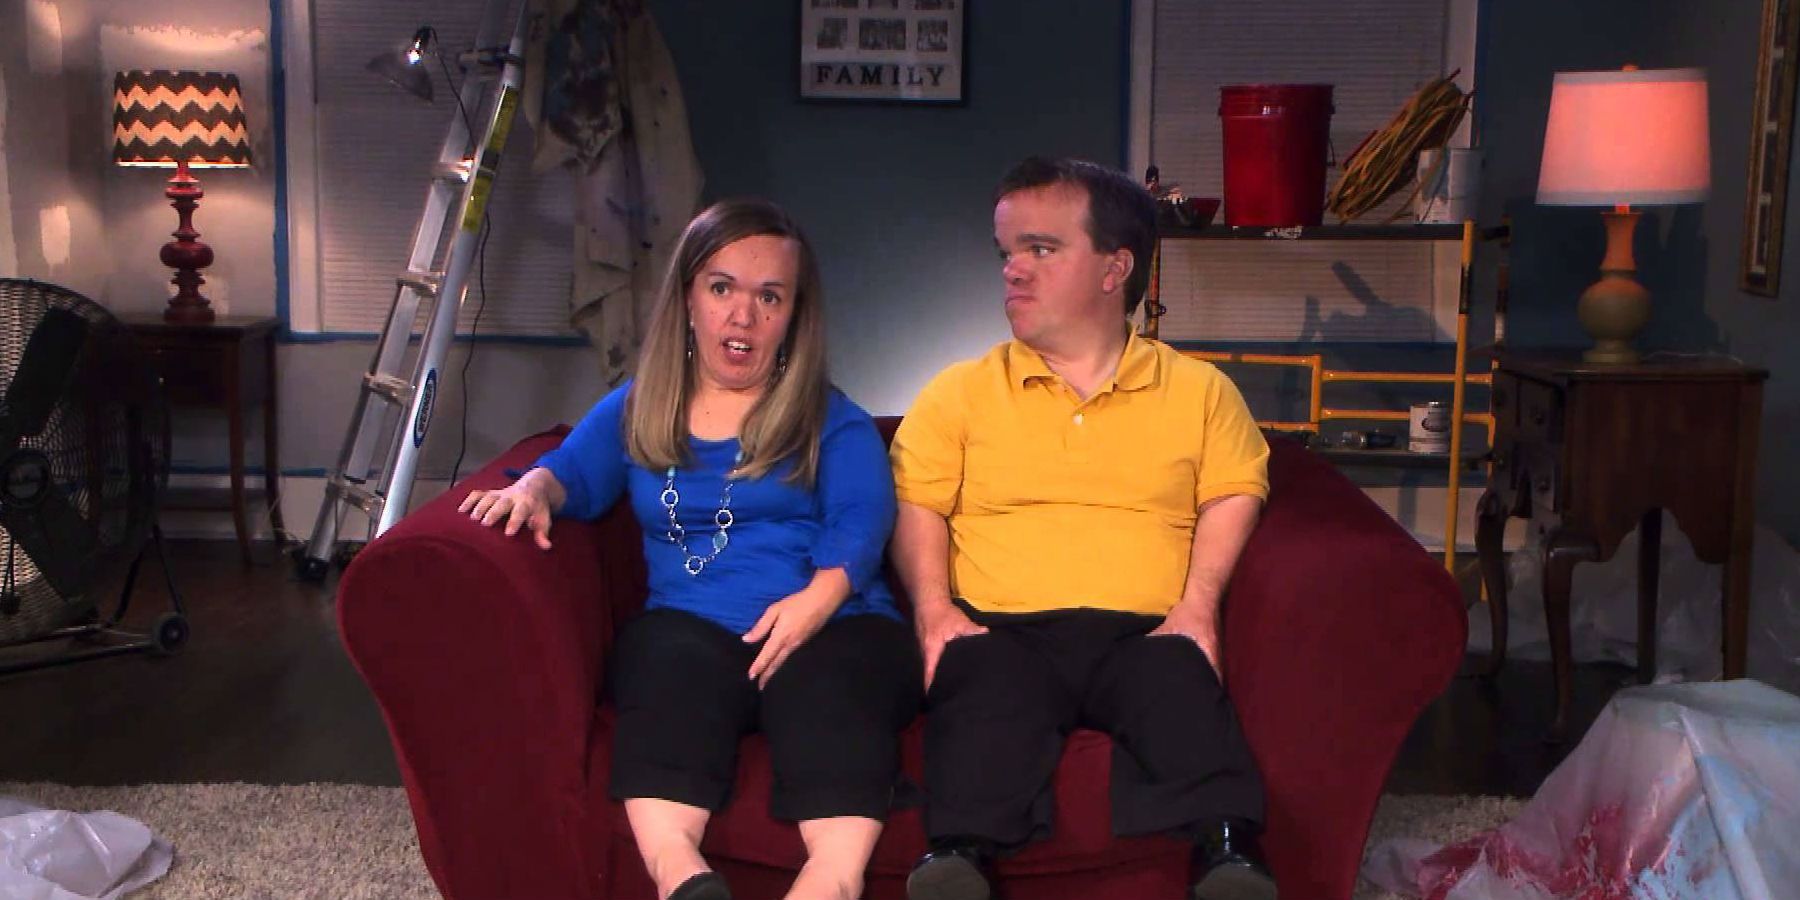 7 Little Johnstons - Trent and Amber on couch